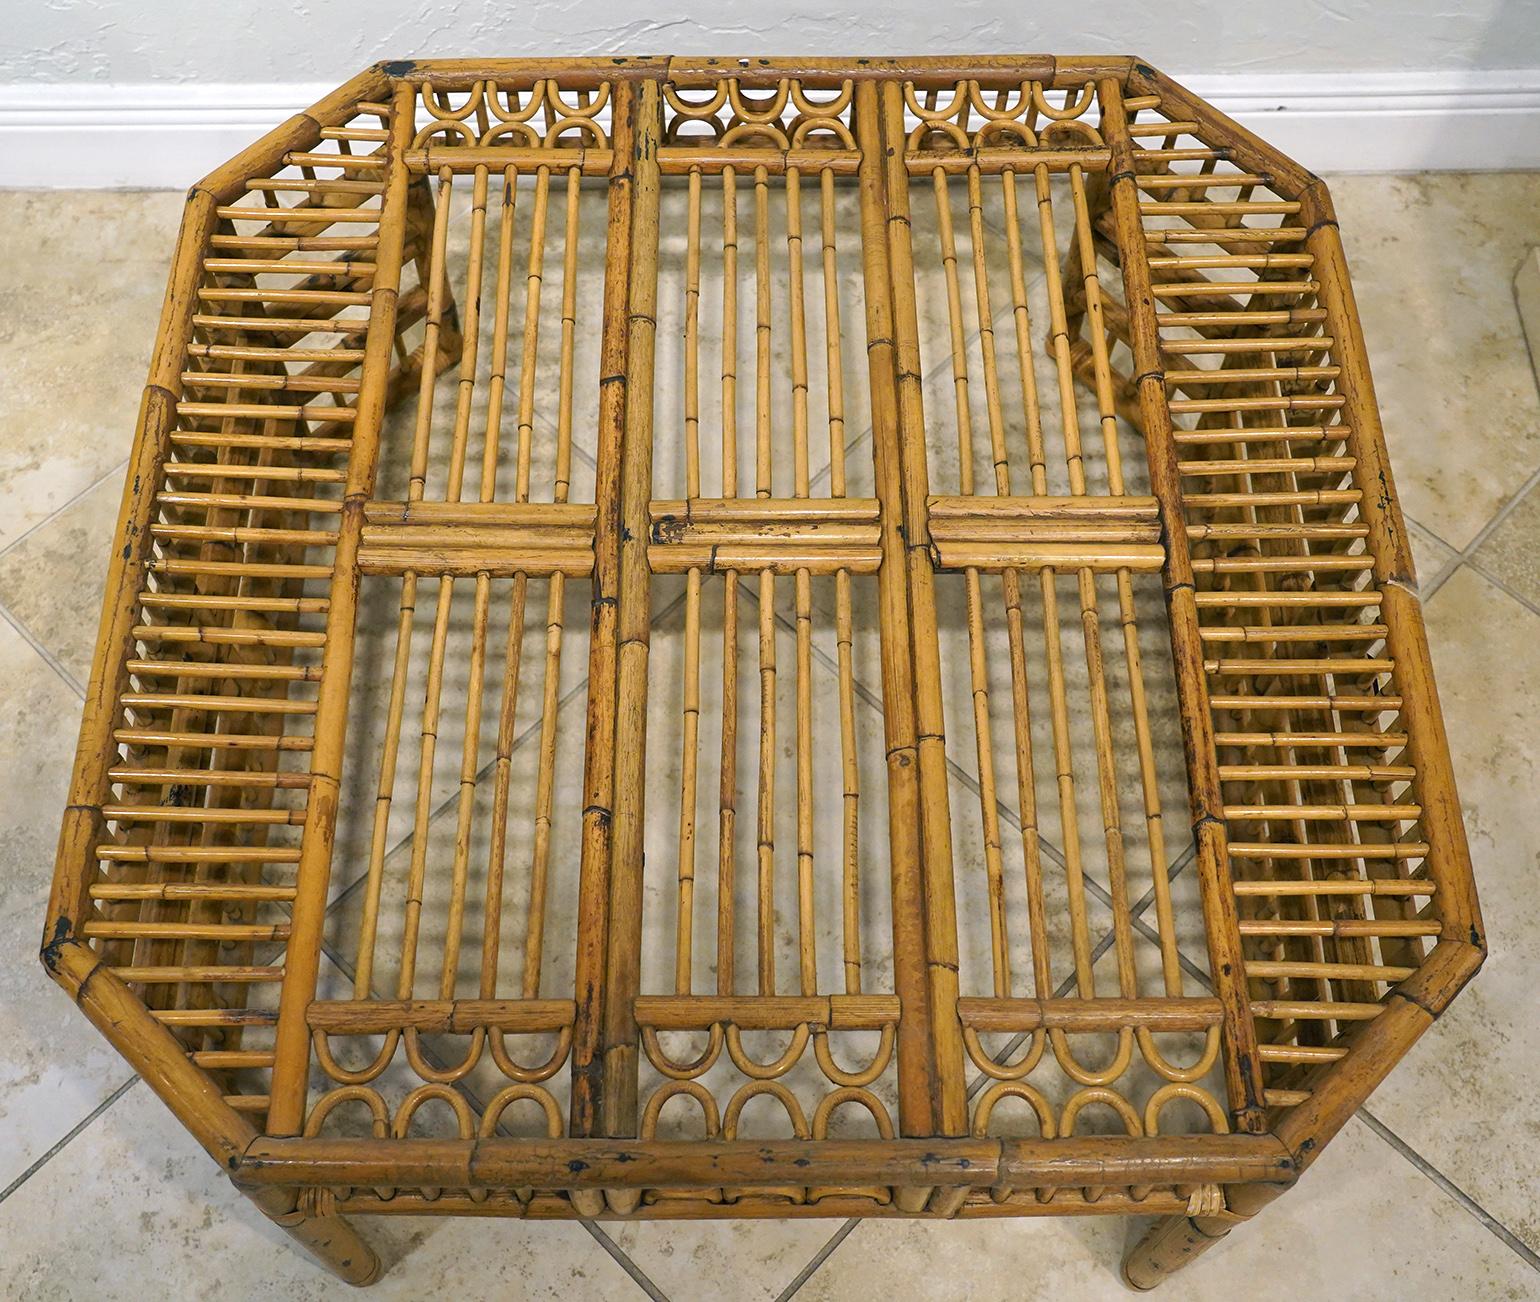 Chinoiserie Brighton Pavilion Chinese Chippendale Style Octagonal Bamboo Rattan Coffee Table